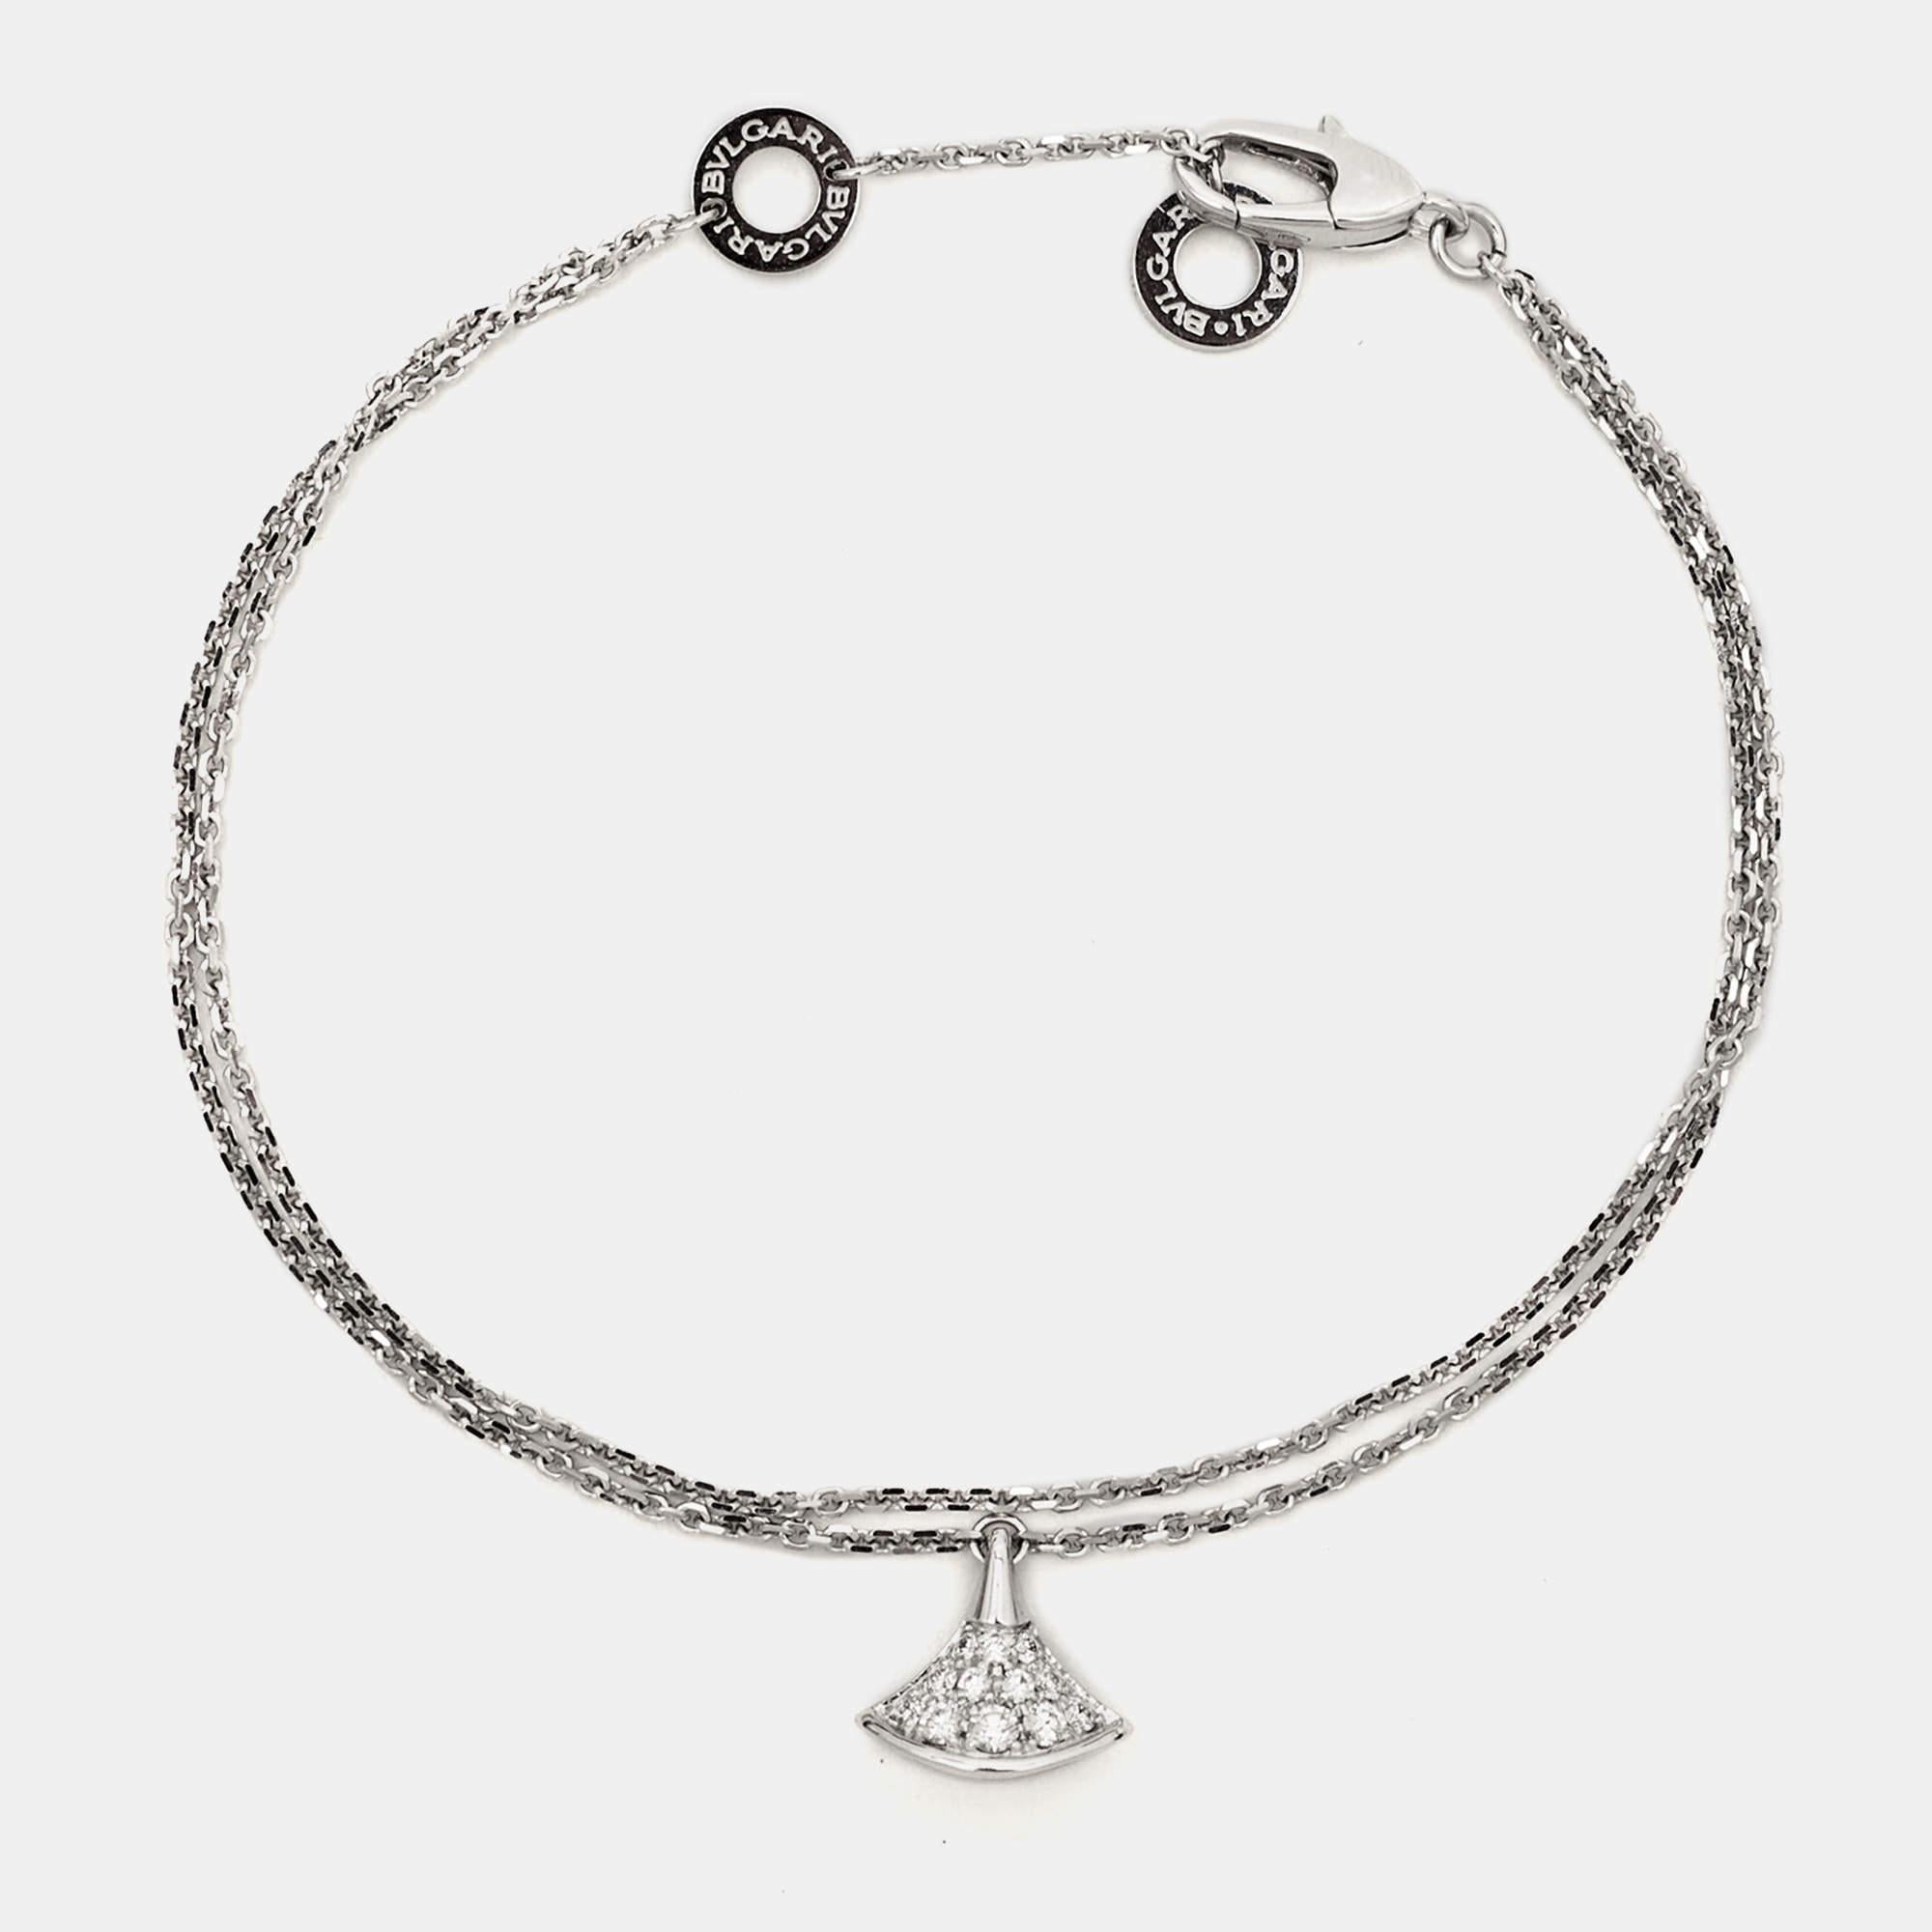 A diva like you deserves something as precious as this bracelet from the Divas' Dream collection by Bvlgari. It has been magnificently crafted from 18k white gold and designed with a bell-shaped charm pave set with shimmery diamonds and chains that